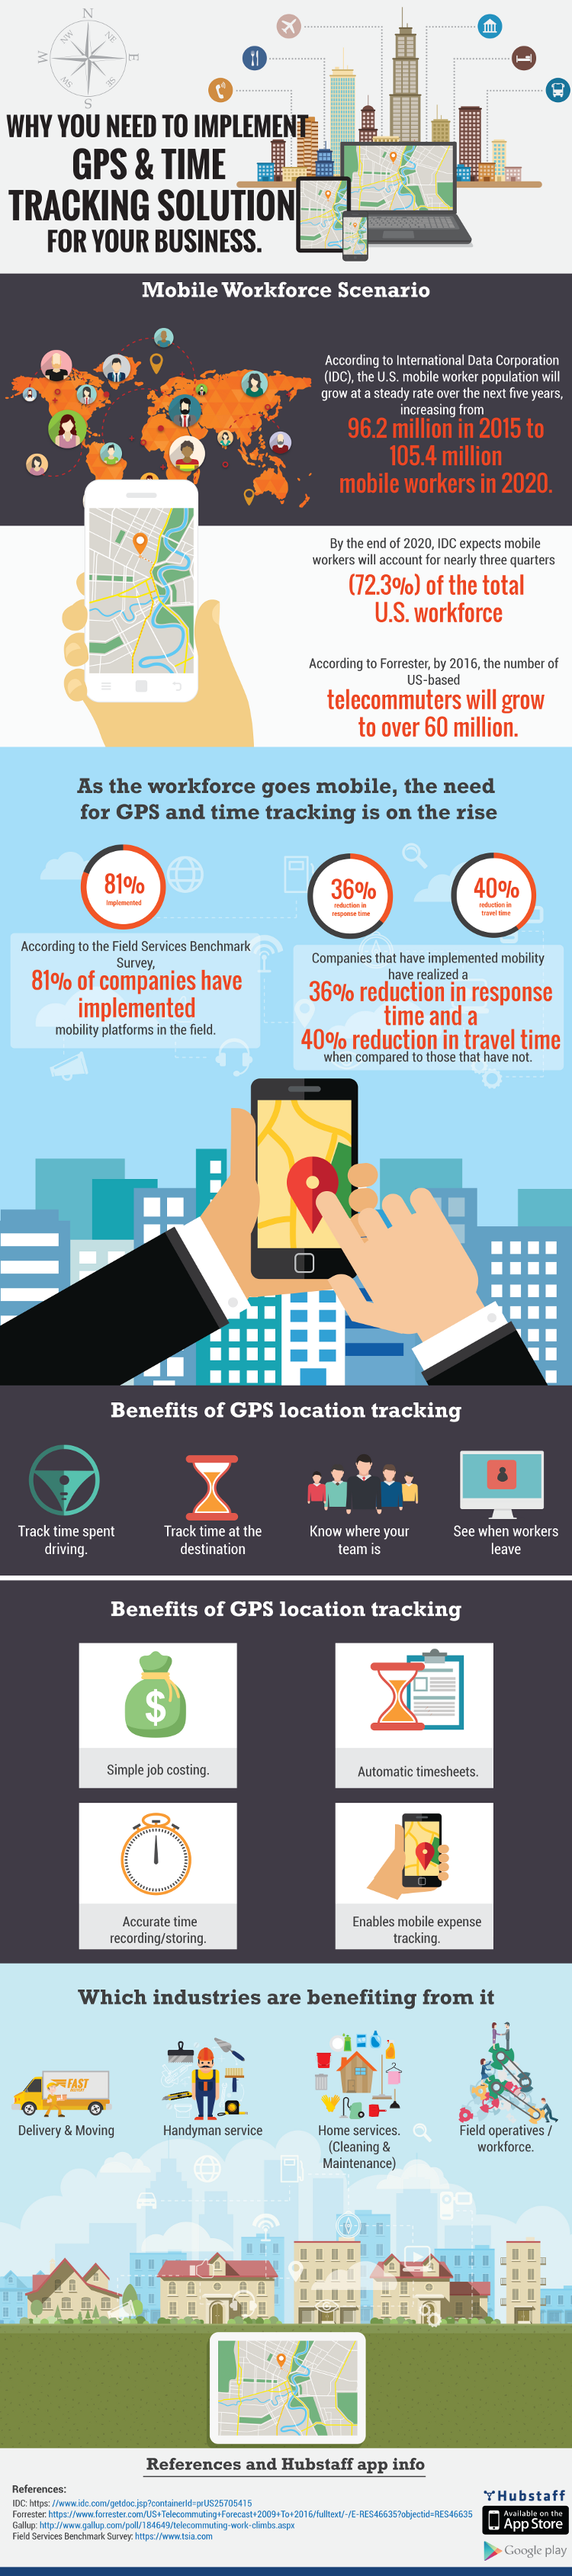 Why Implement a GPS & Time Tracking Solution for Business